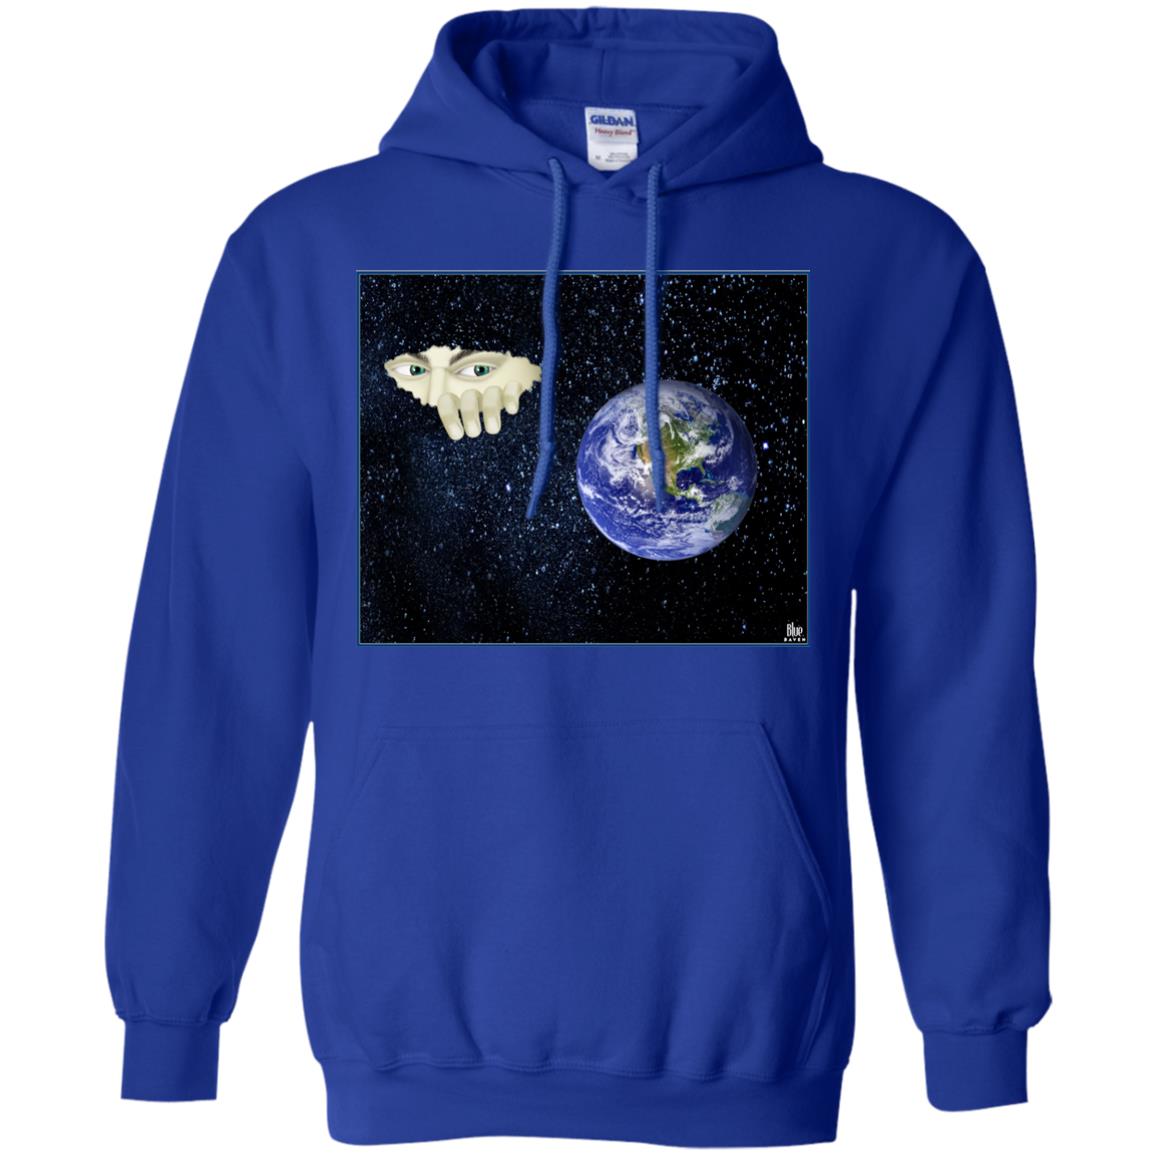 somewhere out there - Adult Hoodie